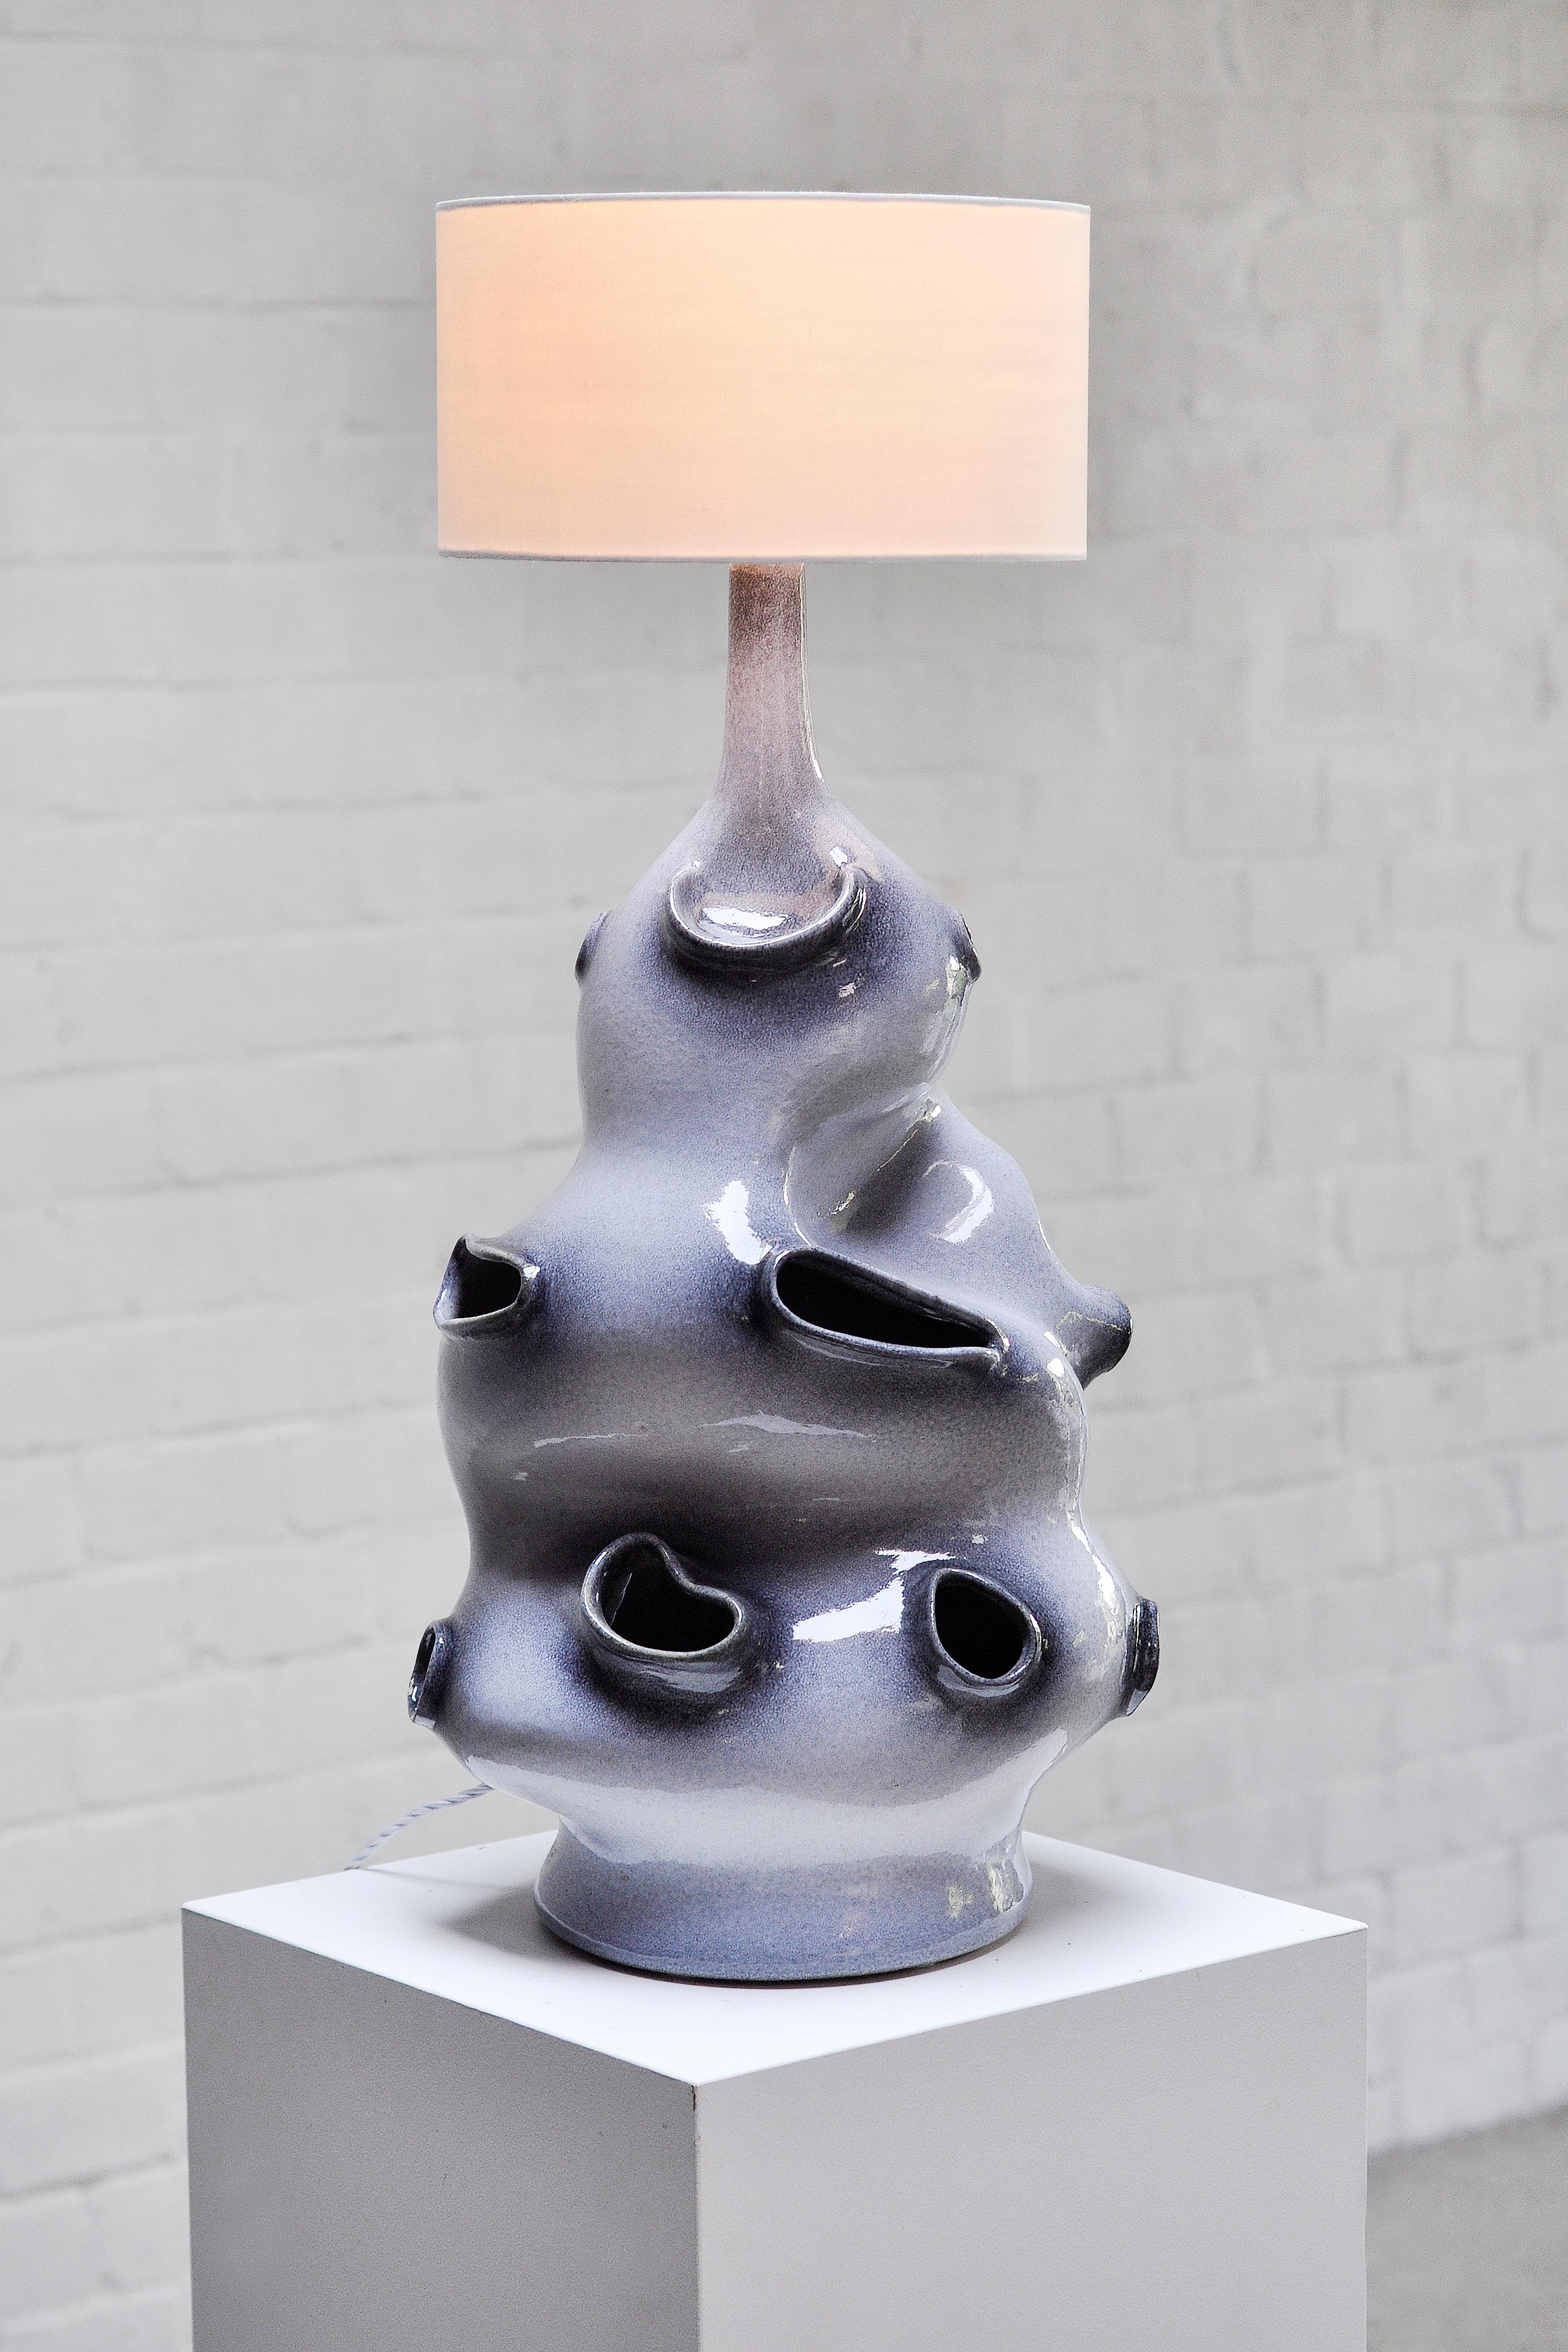 A monumental French table lamp with a sculptural ceramic base, made in France in the early 70s. This large blue tone glazed ceramic lamp features organic and abstract Formations giving it a sculptural and very unique appearance. With its height of